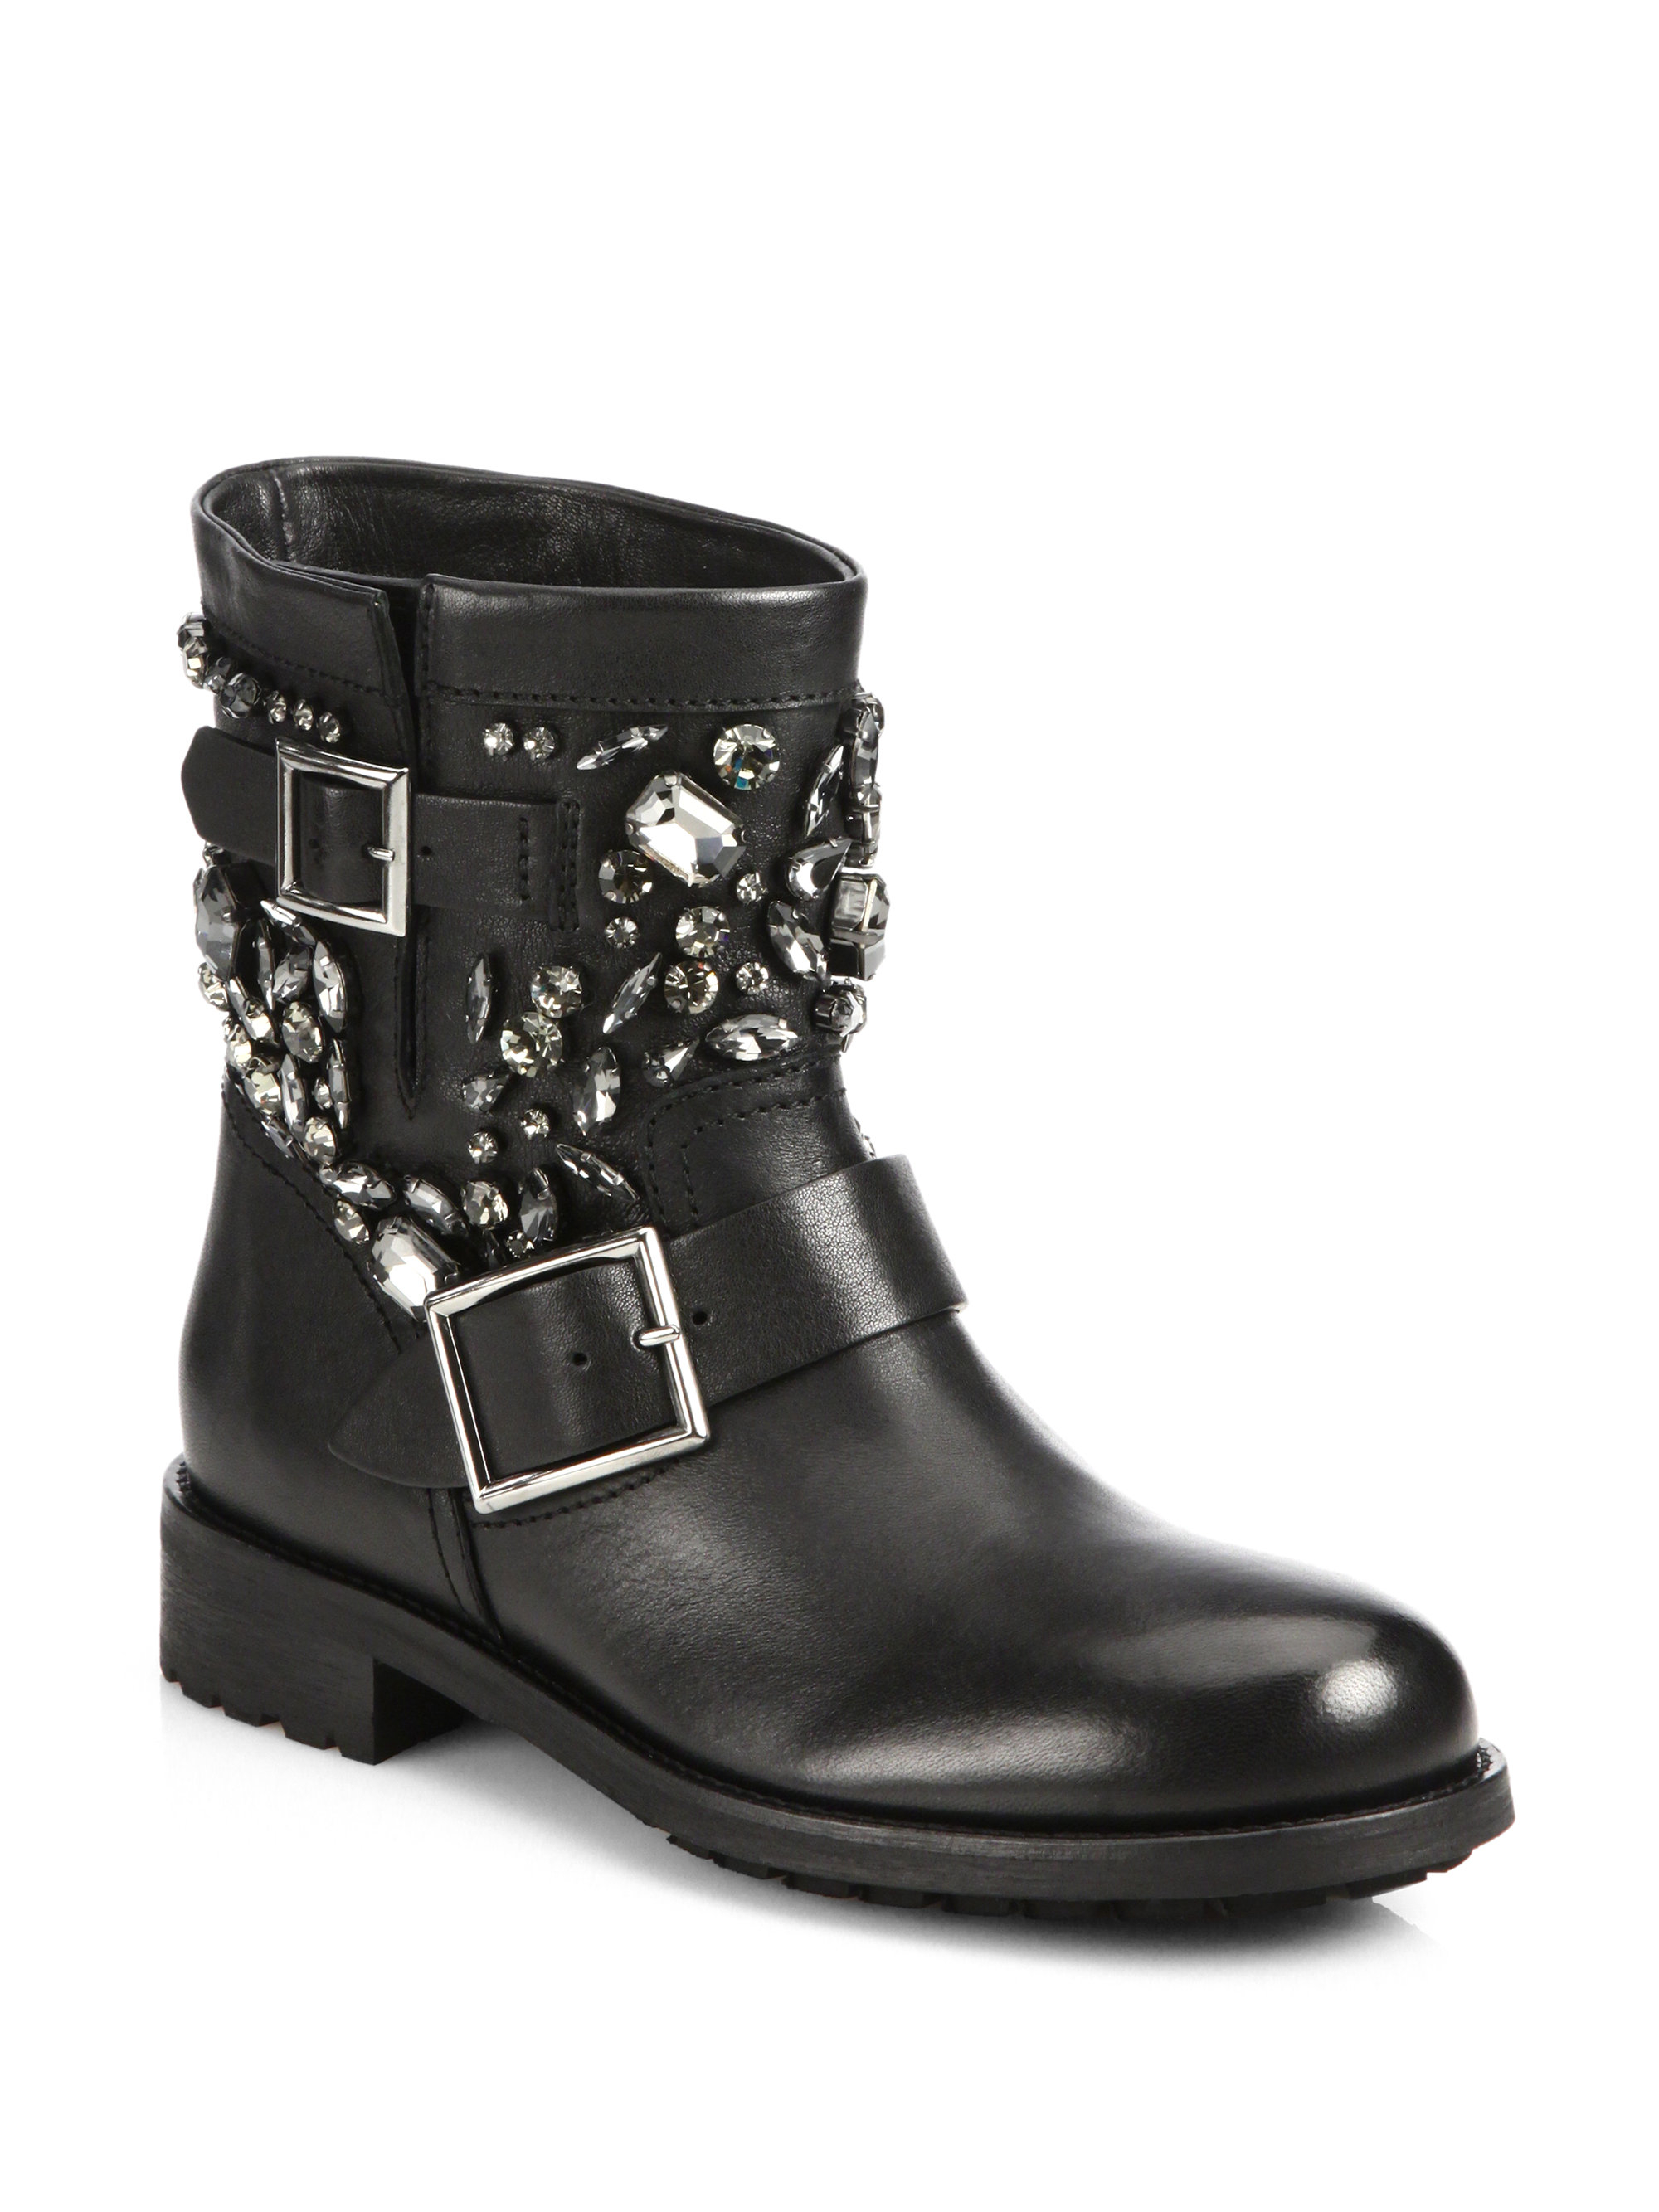 Lyst Jimmy Choo Crystalstudded Leather Biker Boots in Black